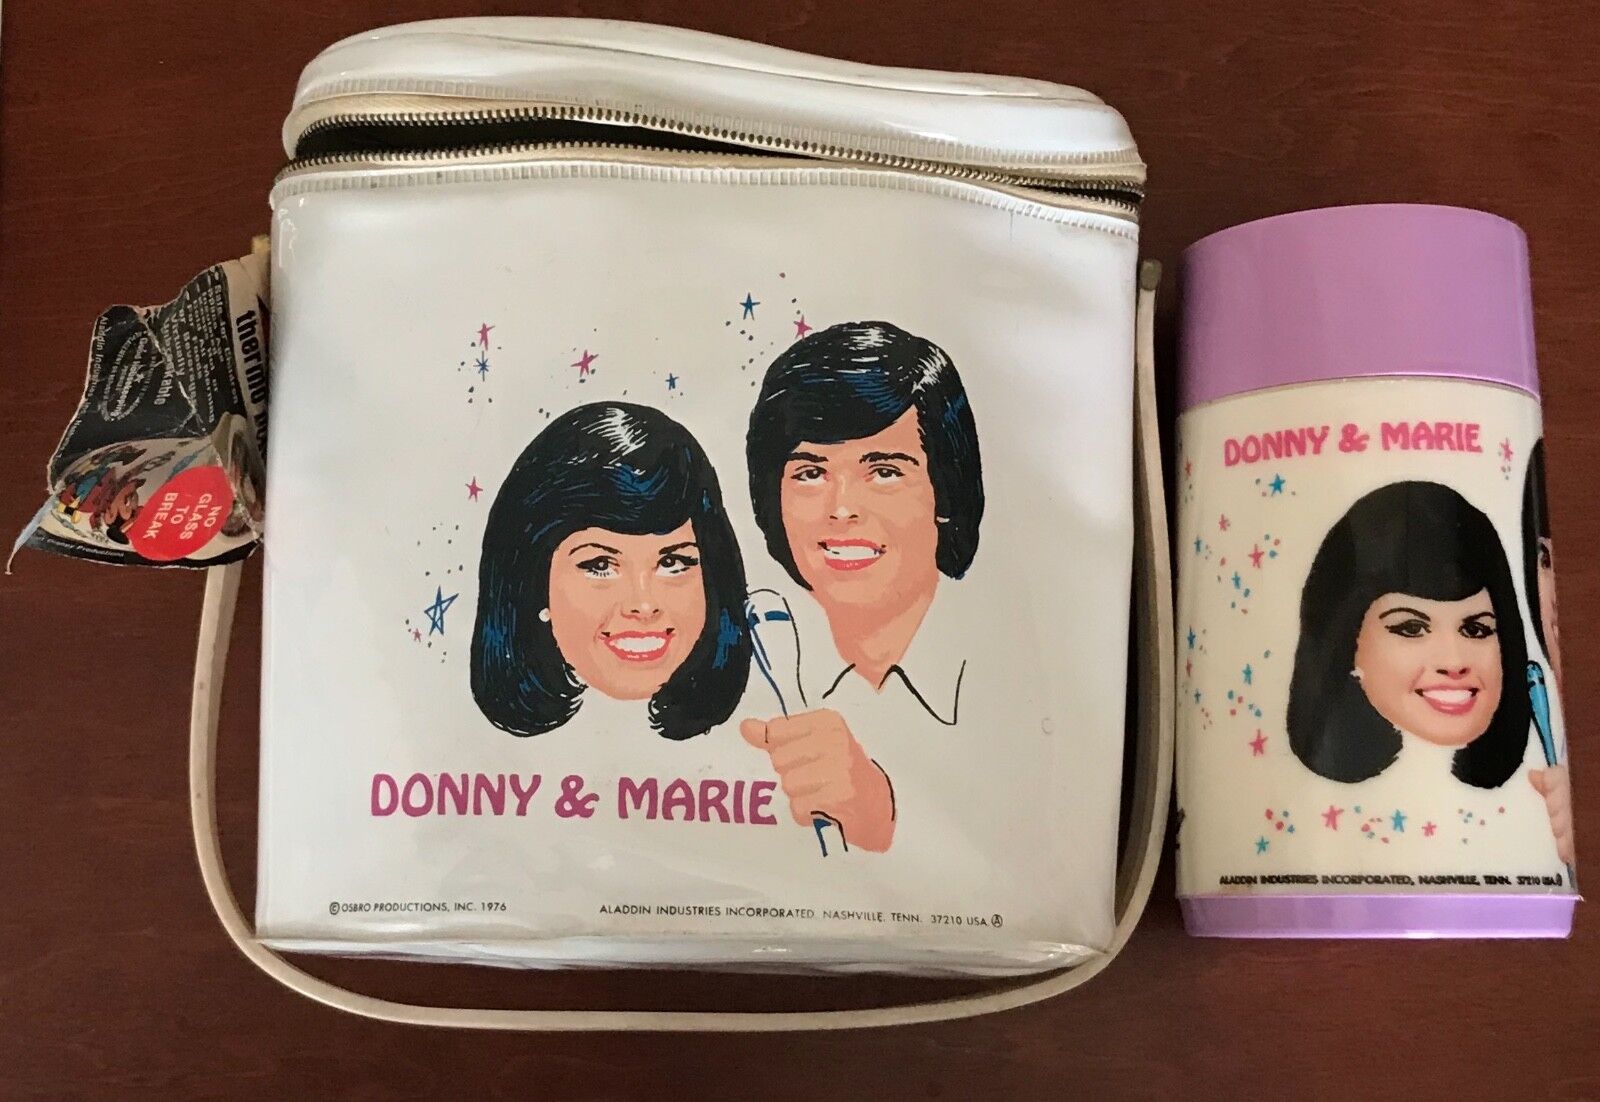 DONNY & MARIE  LUNCH BOX  BRUNCH BAG  TAGGED WITH THERMOS BOTTLE  1976  ALADDIN